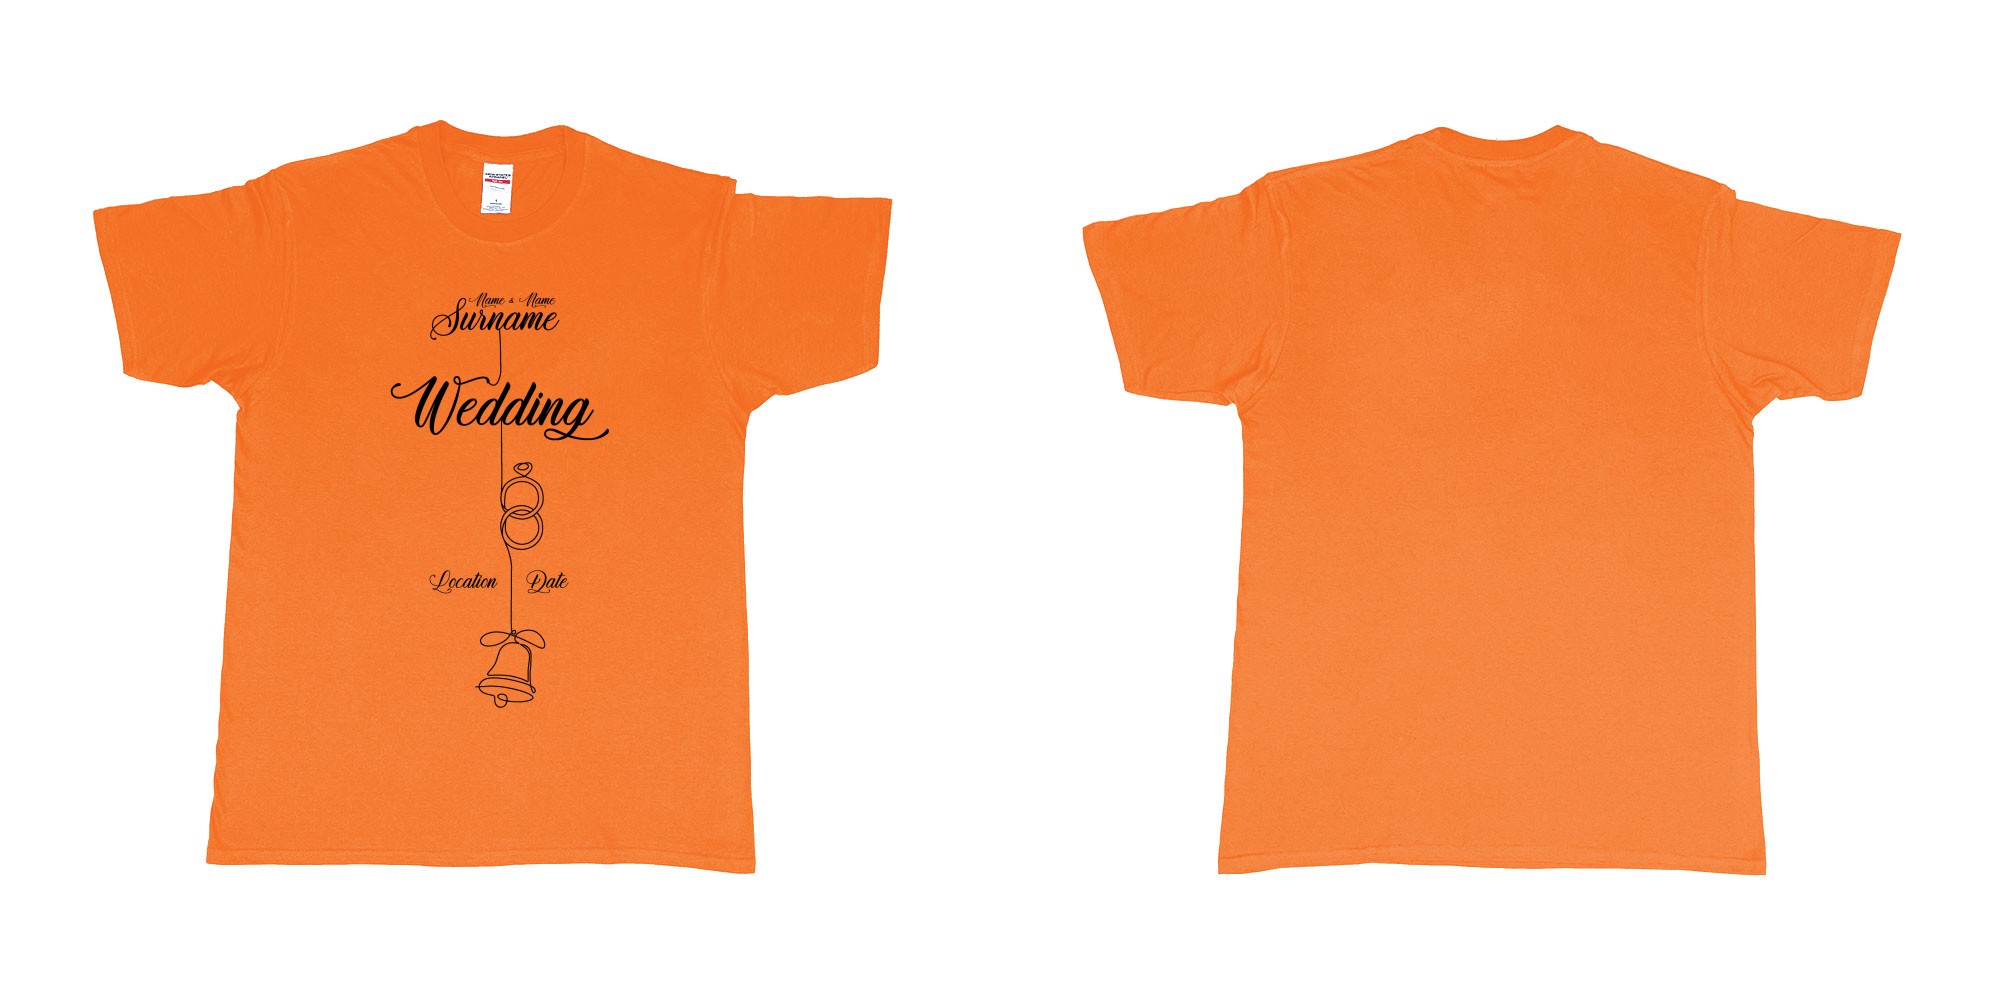 Custom tshirt design wedding string rings bell in fabric color orange choice your own text made in Bali by The Pirate Way